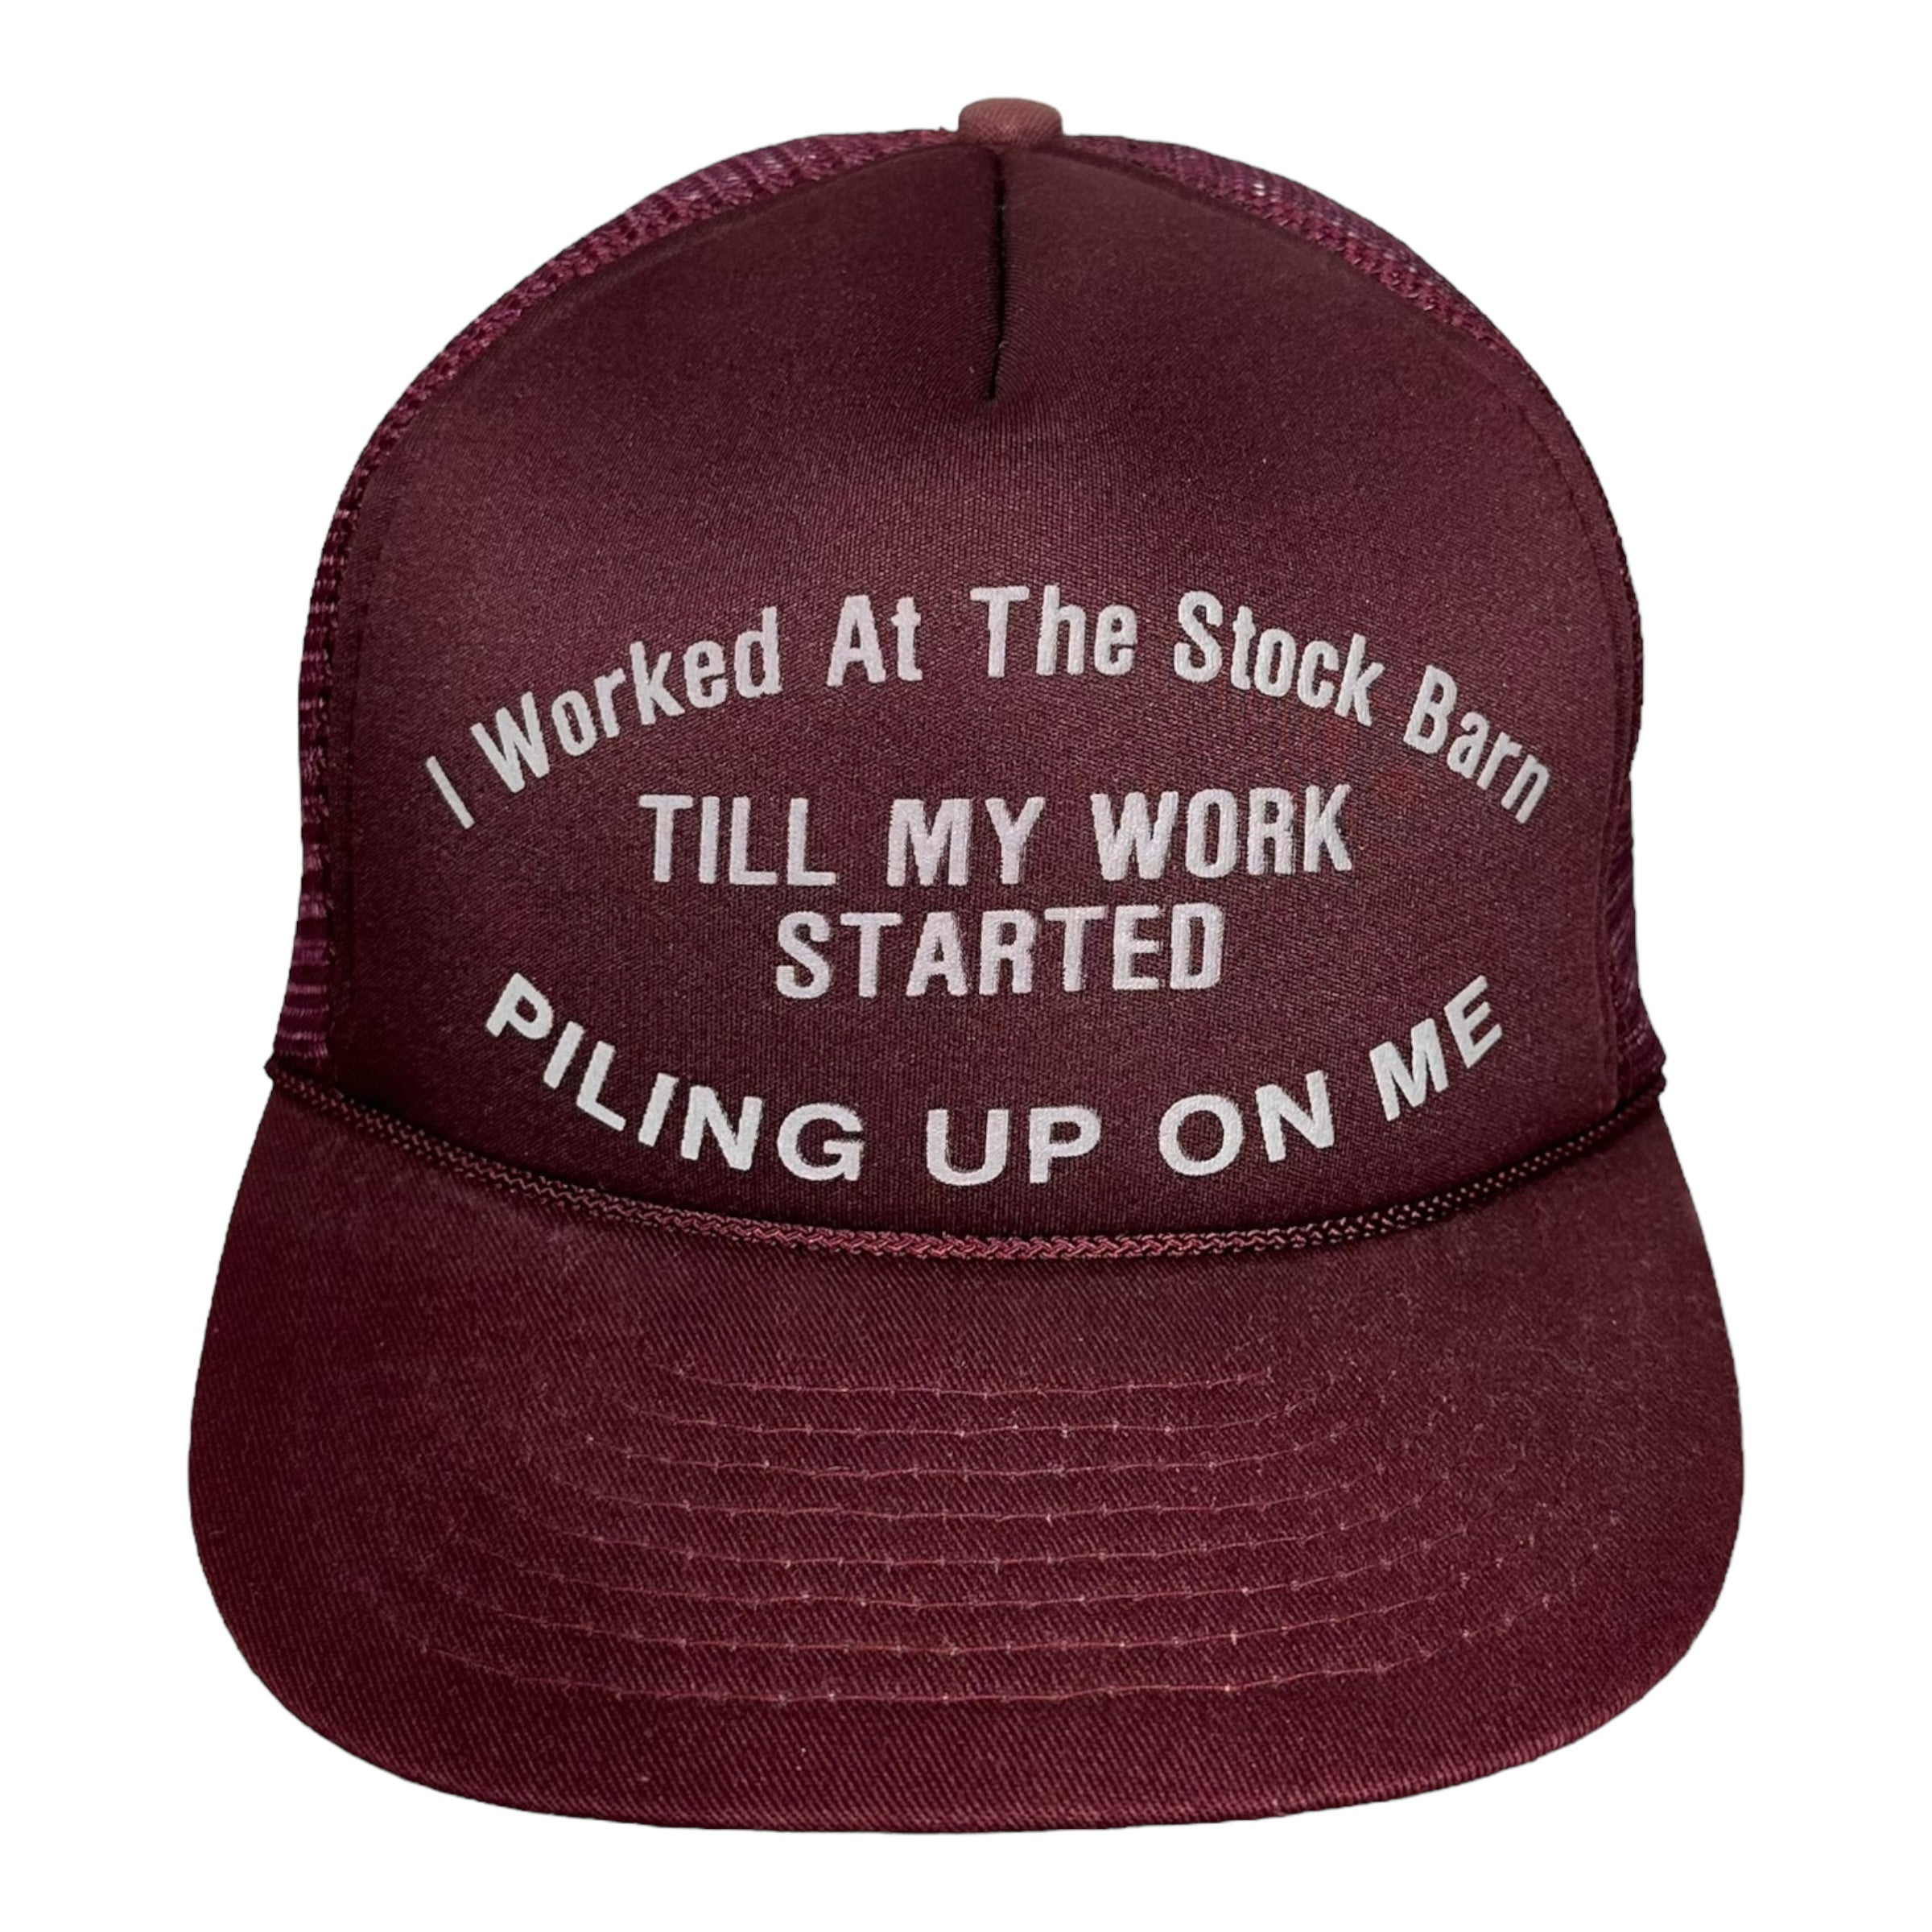 Vintage "I Worked At The Stock Barn" Trucker Snapback